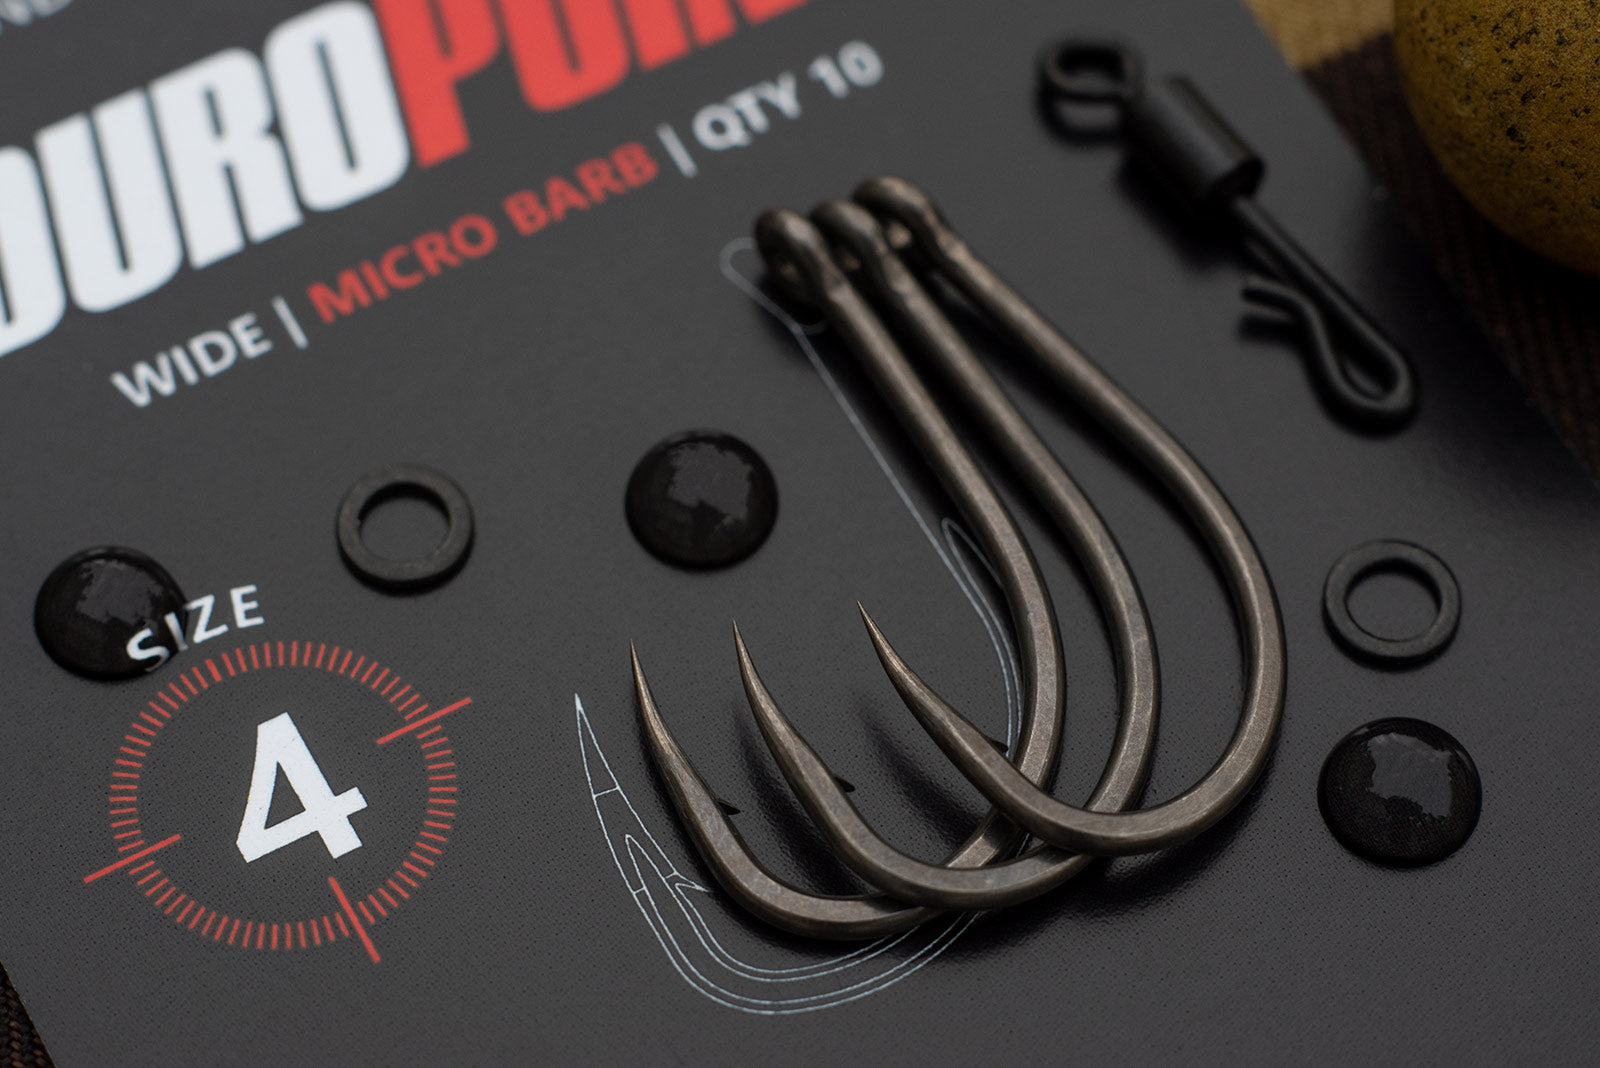 Which are the Sharpest Carp hooks? The Duropoint range from Angling iron are widely regarded as the sharpest from the packet. Pictured here with razor points are the Wide Gapes in a size 4.